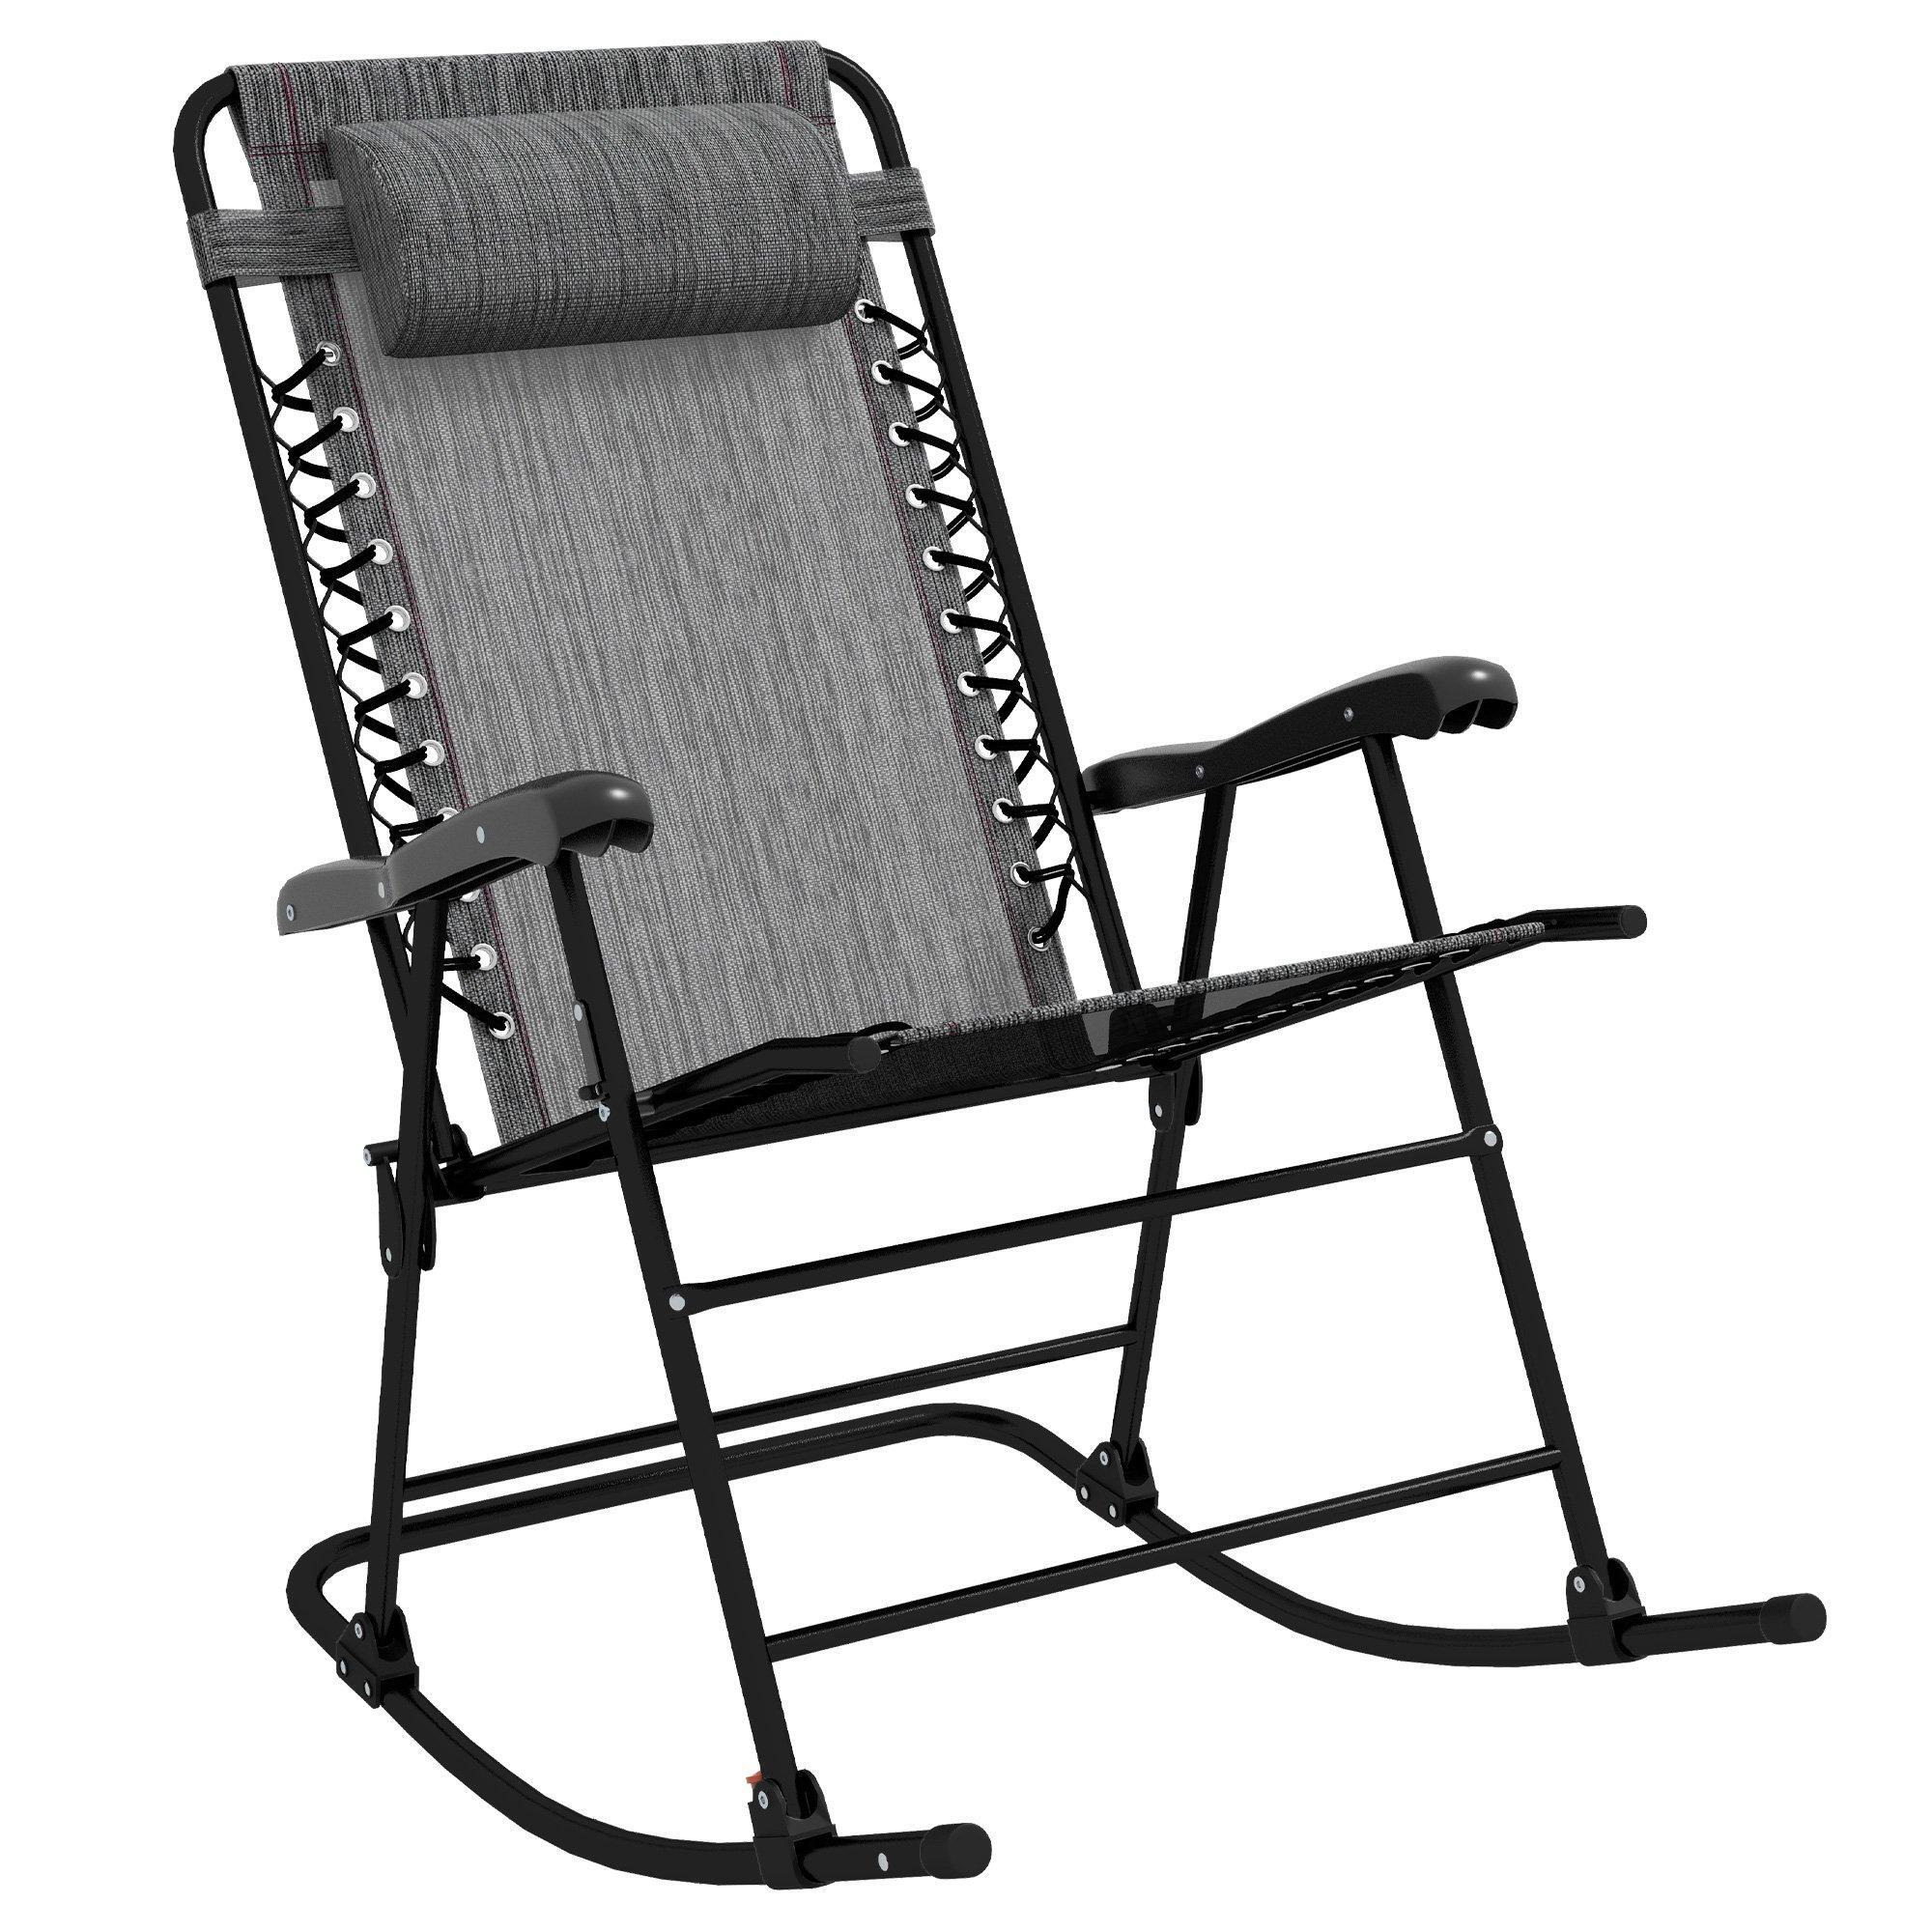 Folding Rocking Chair Outdoor Portable Zero Gravity Chair with Headrest Grey - image 1